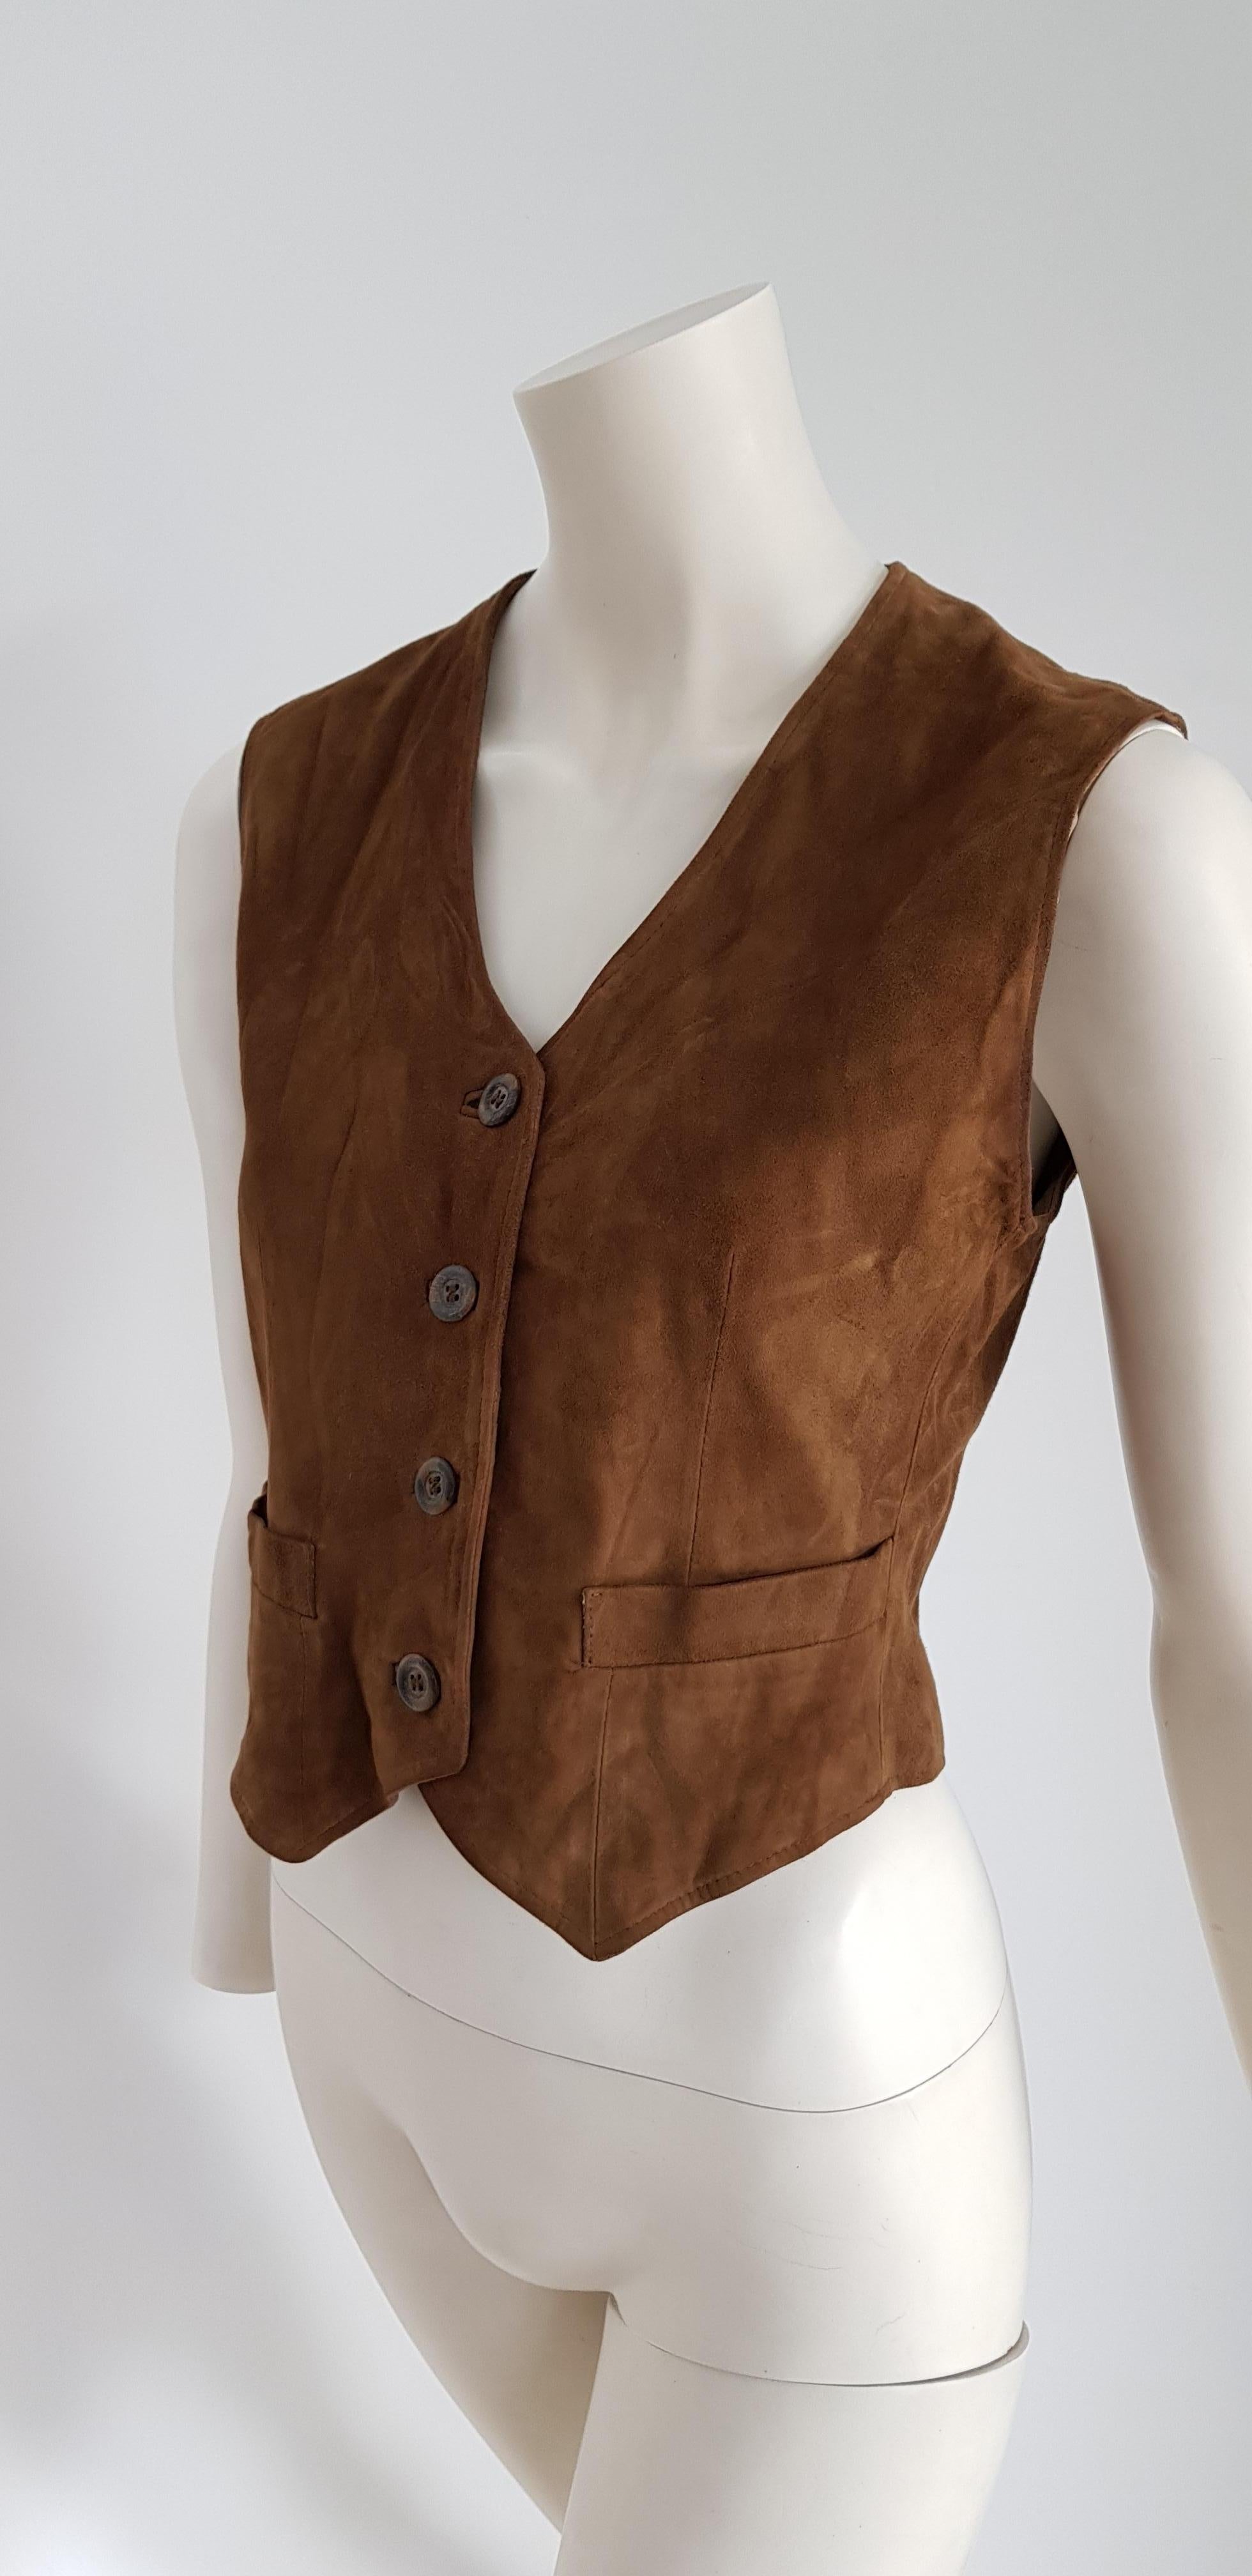 Giorgio ARMANI brown suede 4 front buttons vest gilet - Unworn, New

SIZE: equivalent to about Small / Medium, please review approx measurements as follows in cm: lenght 47, chest underarm to underarm 50, bust circumference 90, shoulder from seam to